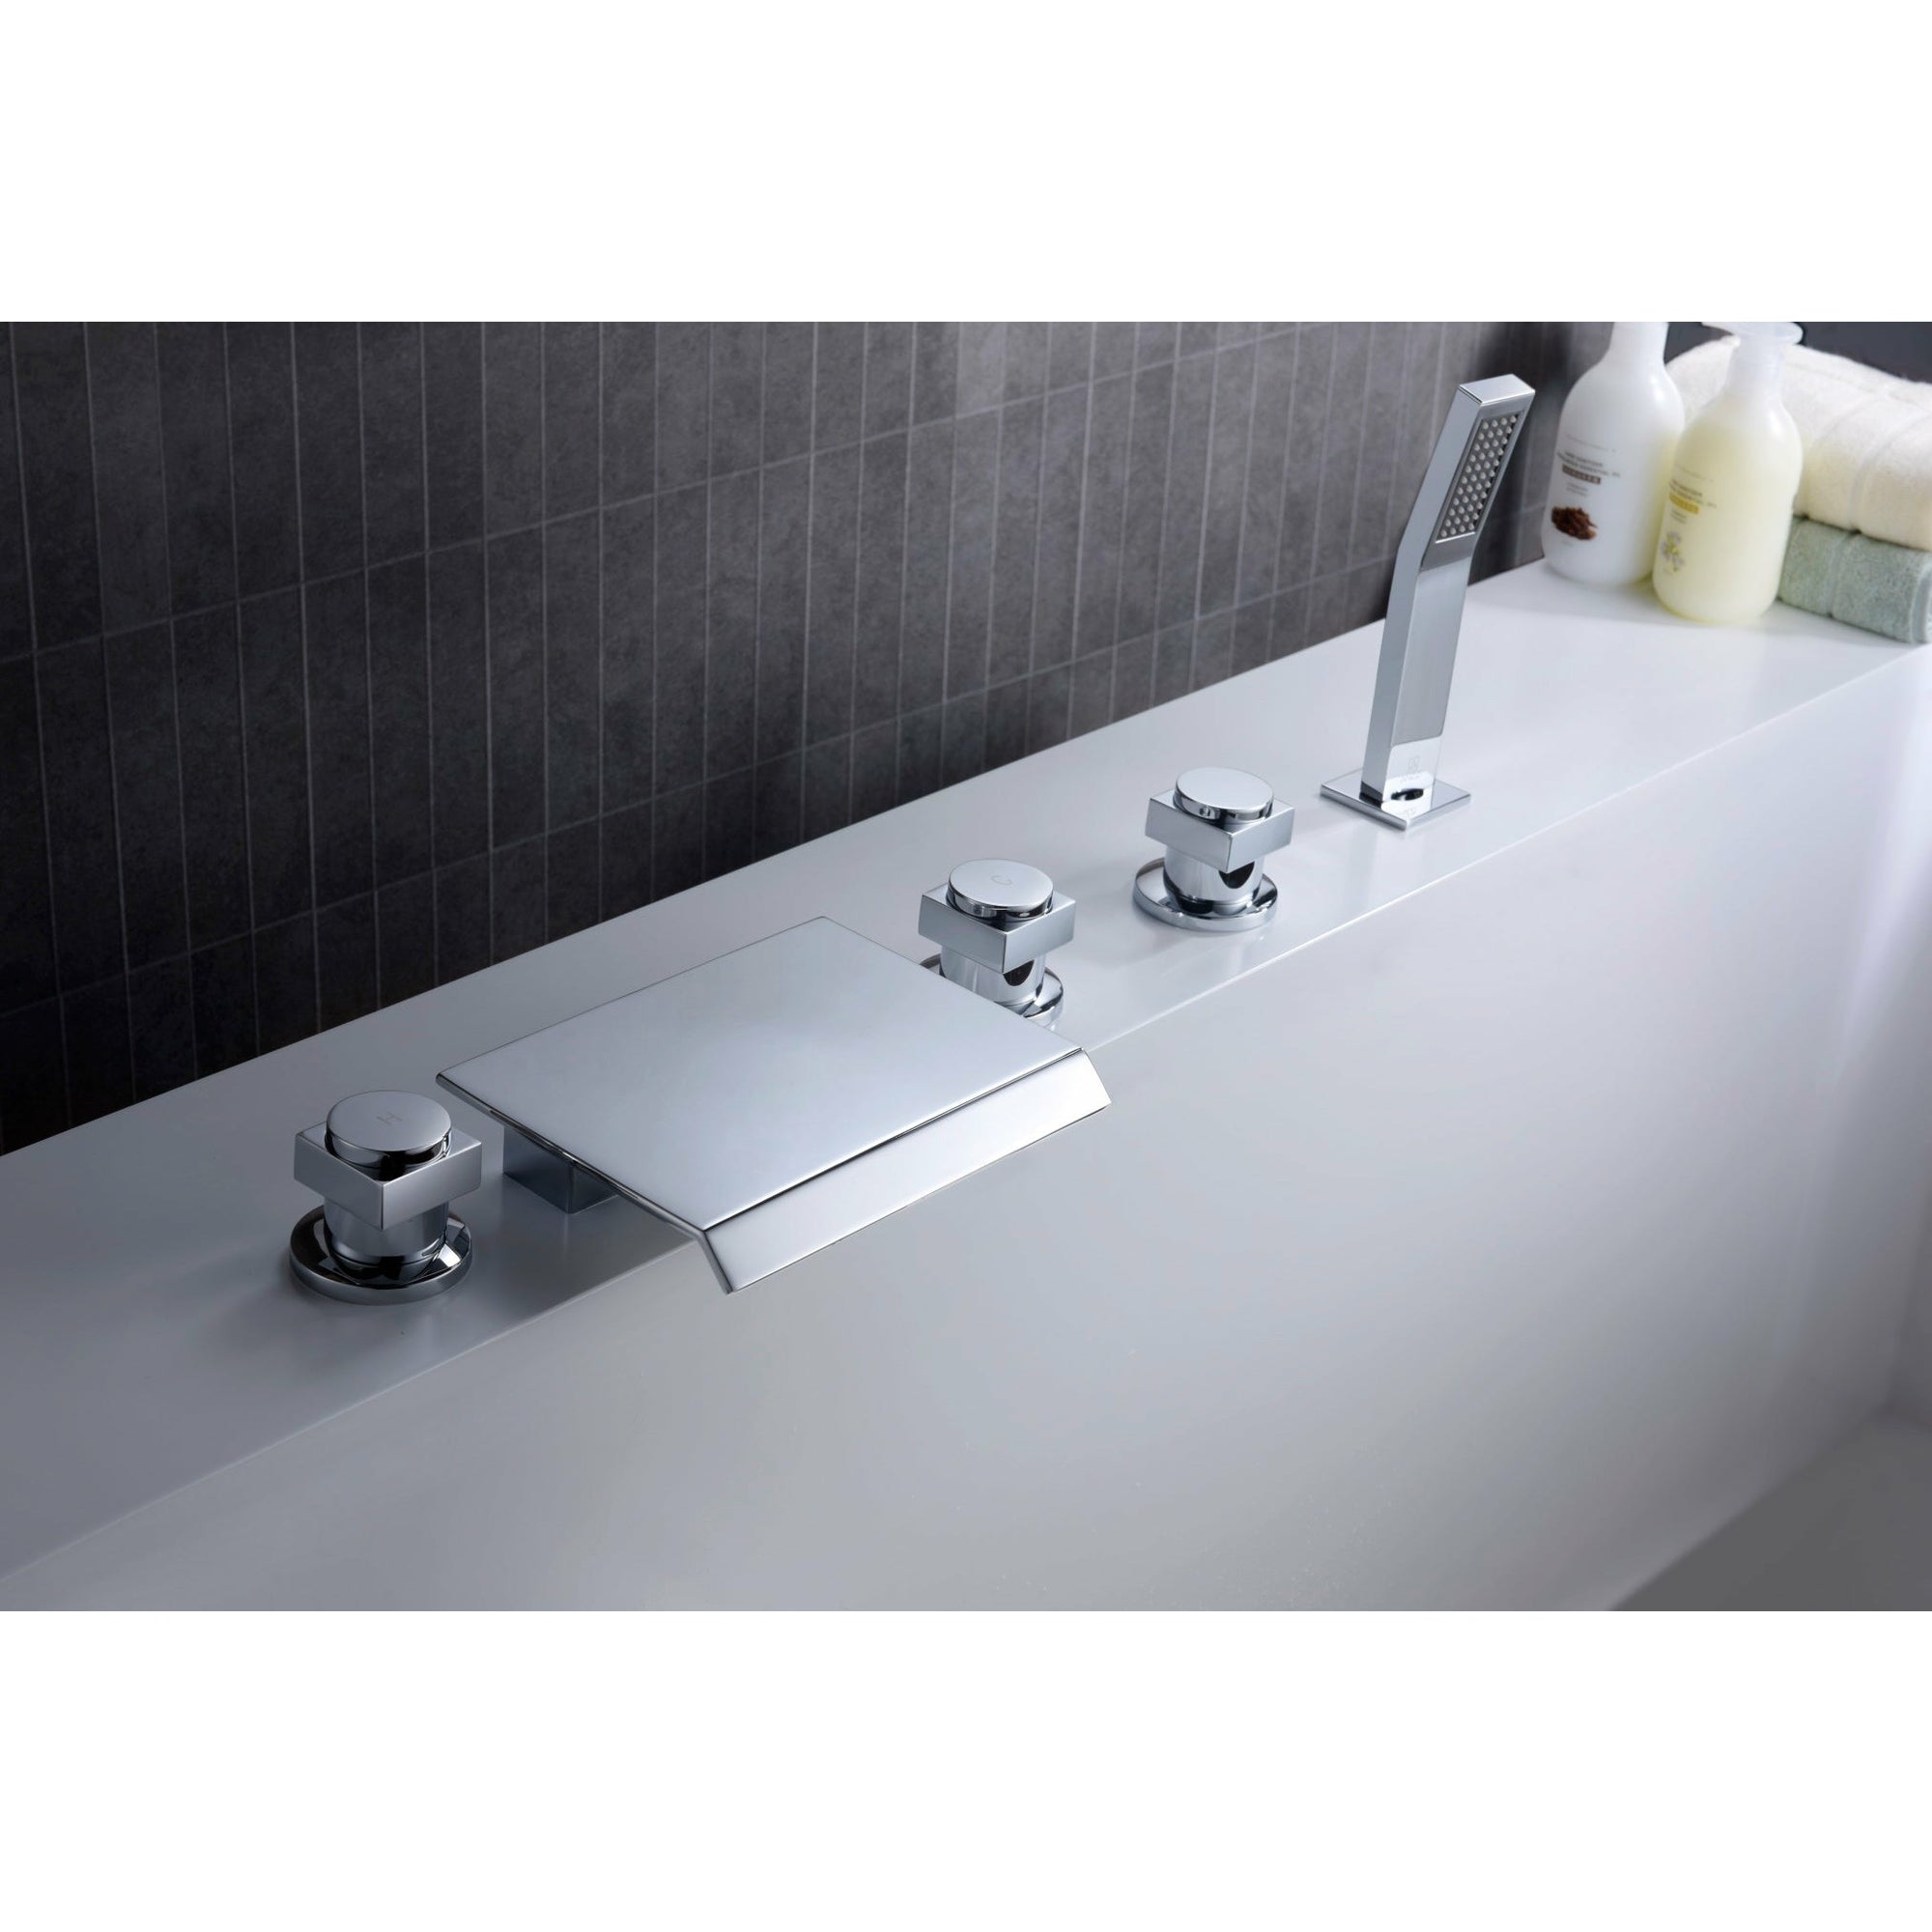 Anzzi Guaira 3-Handle Deck-Mount Roman Tub Faucet in Chrome - Waterfall Spout - Extendable Euro-grip Handheld Sprayer - Chrome Finish Housing a Solid Brass Interior - FR-AZ044CH - Vital Hydrotherapy